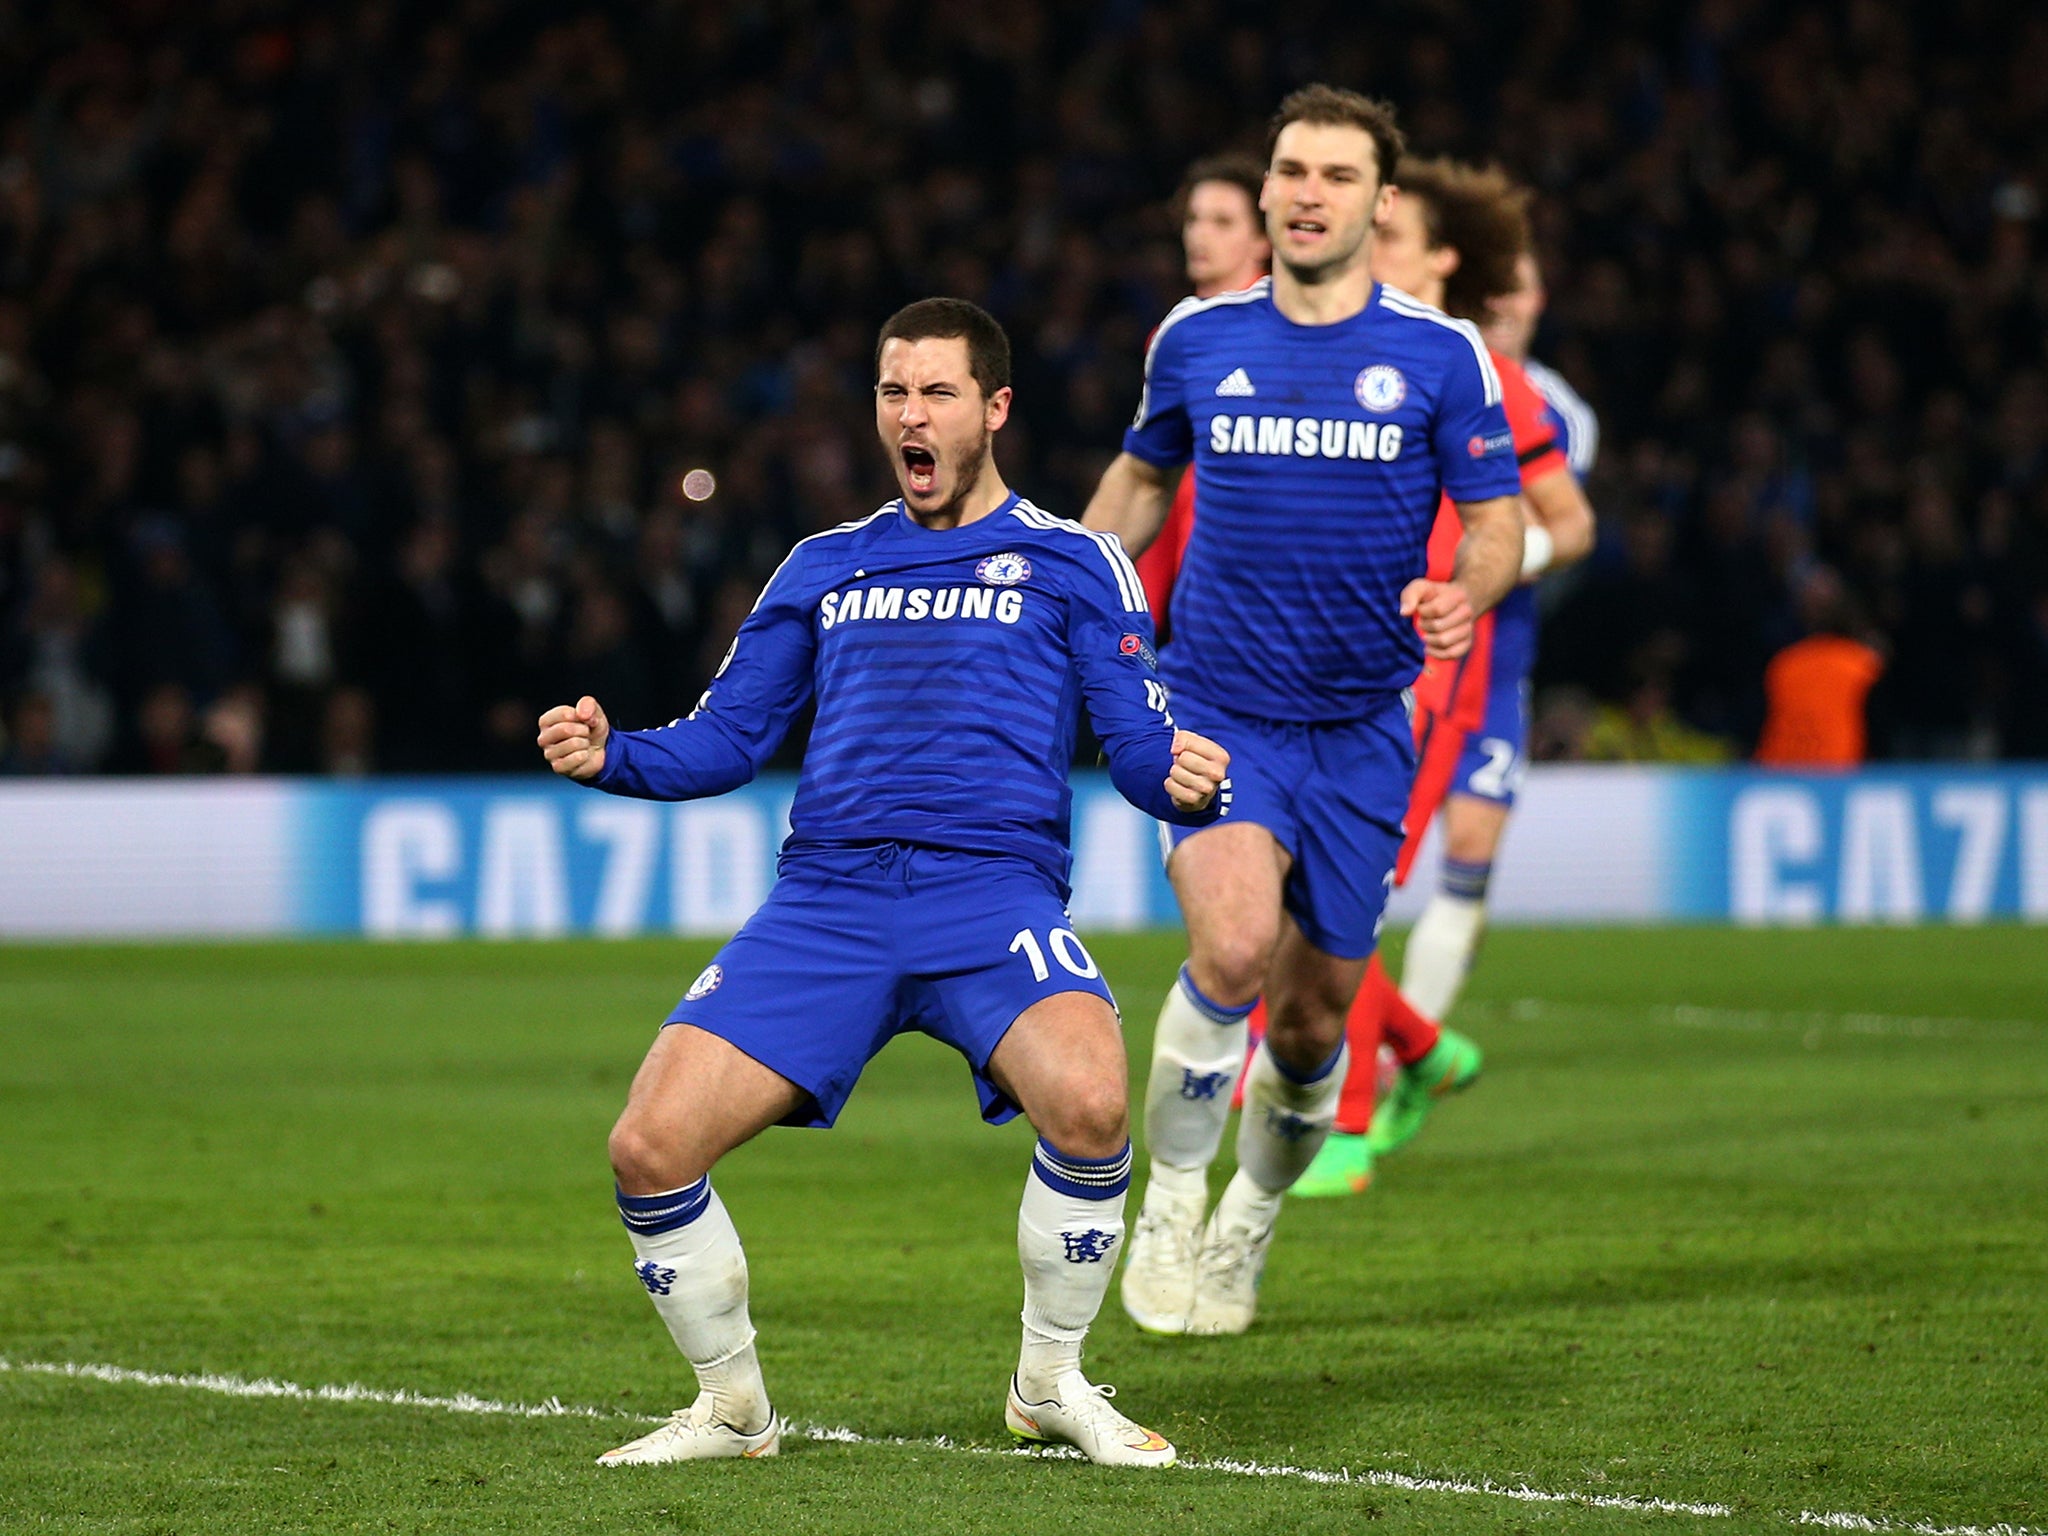 Eden Hazard celebrates after scoring from the spot in extra-time